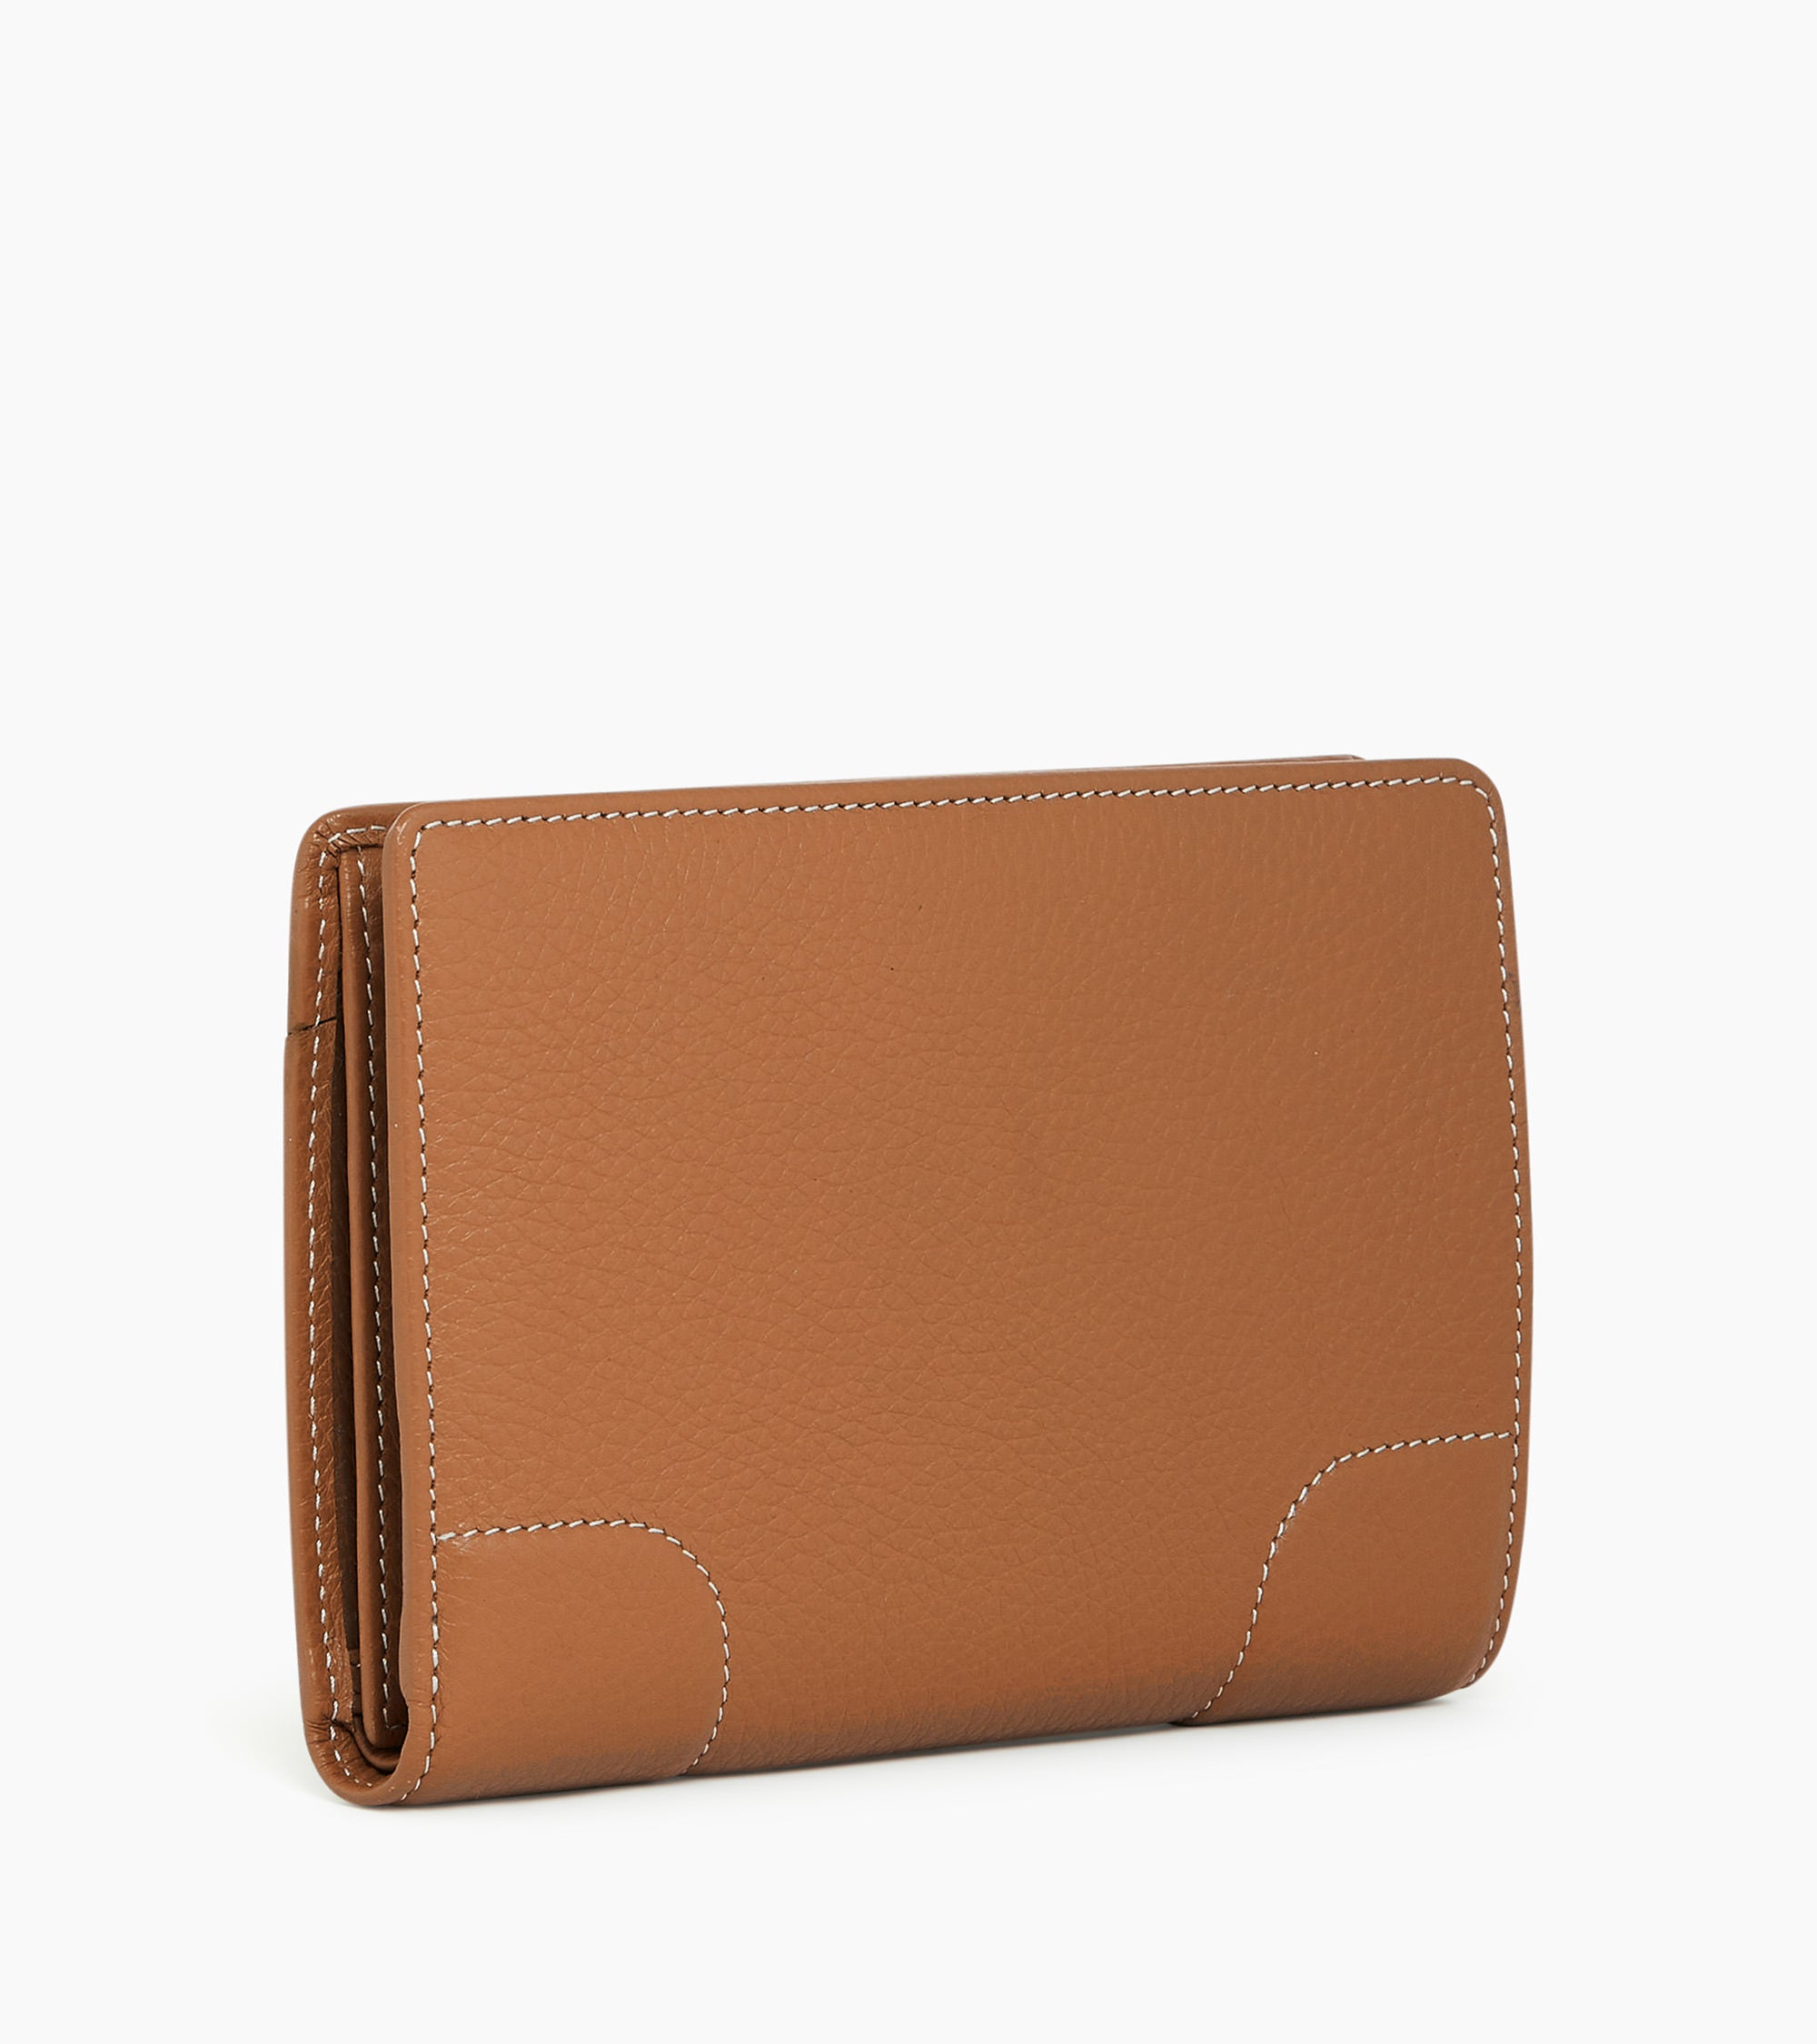 Romy medium-sized wallet in grained leather